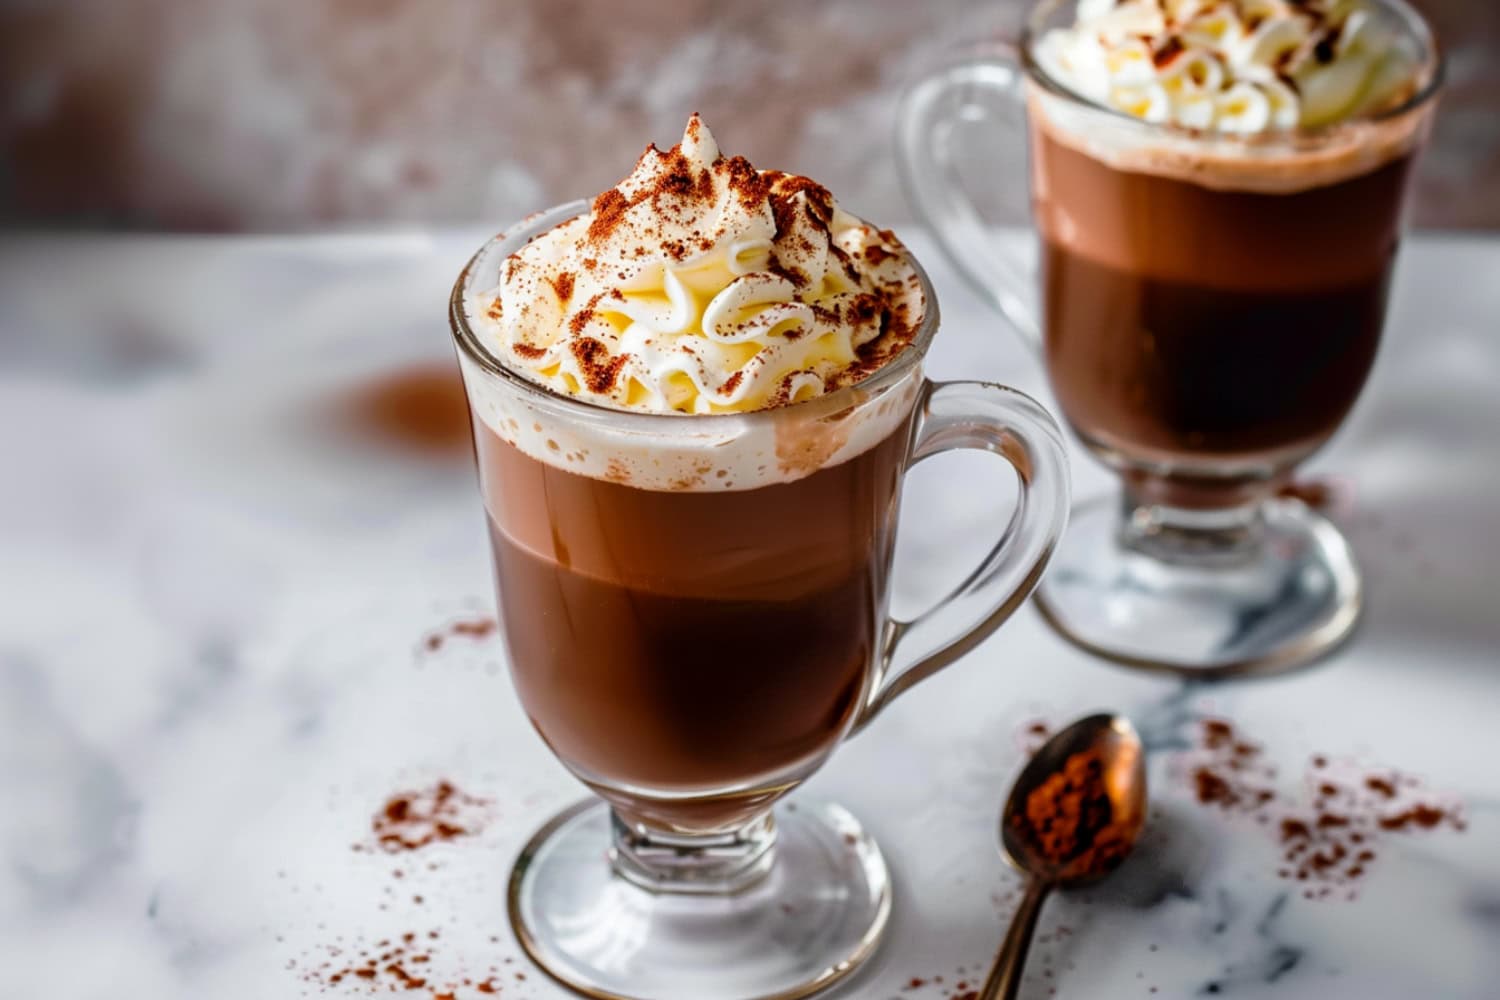 Irresistible Kahlua hot chocolate topped with a mountain of whipped cream and cocoa powder